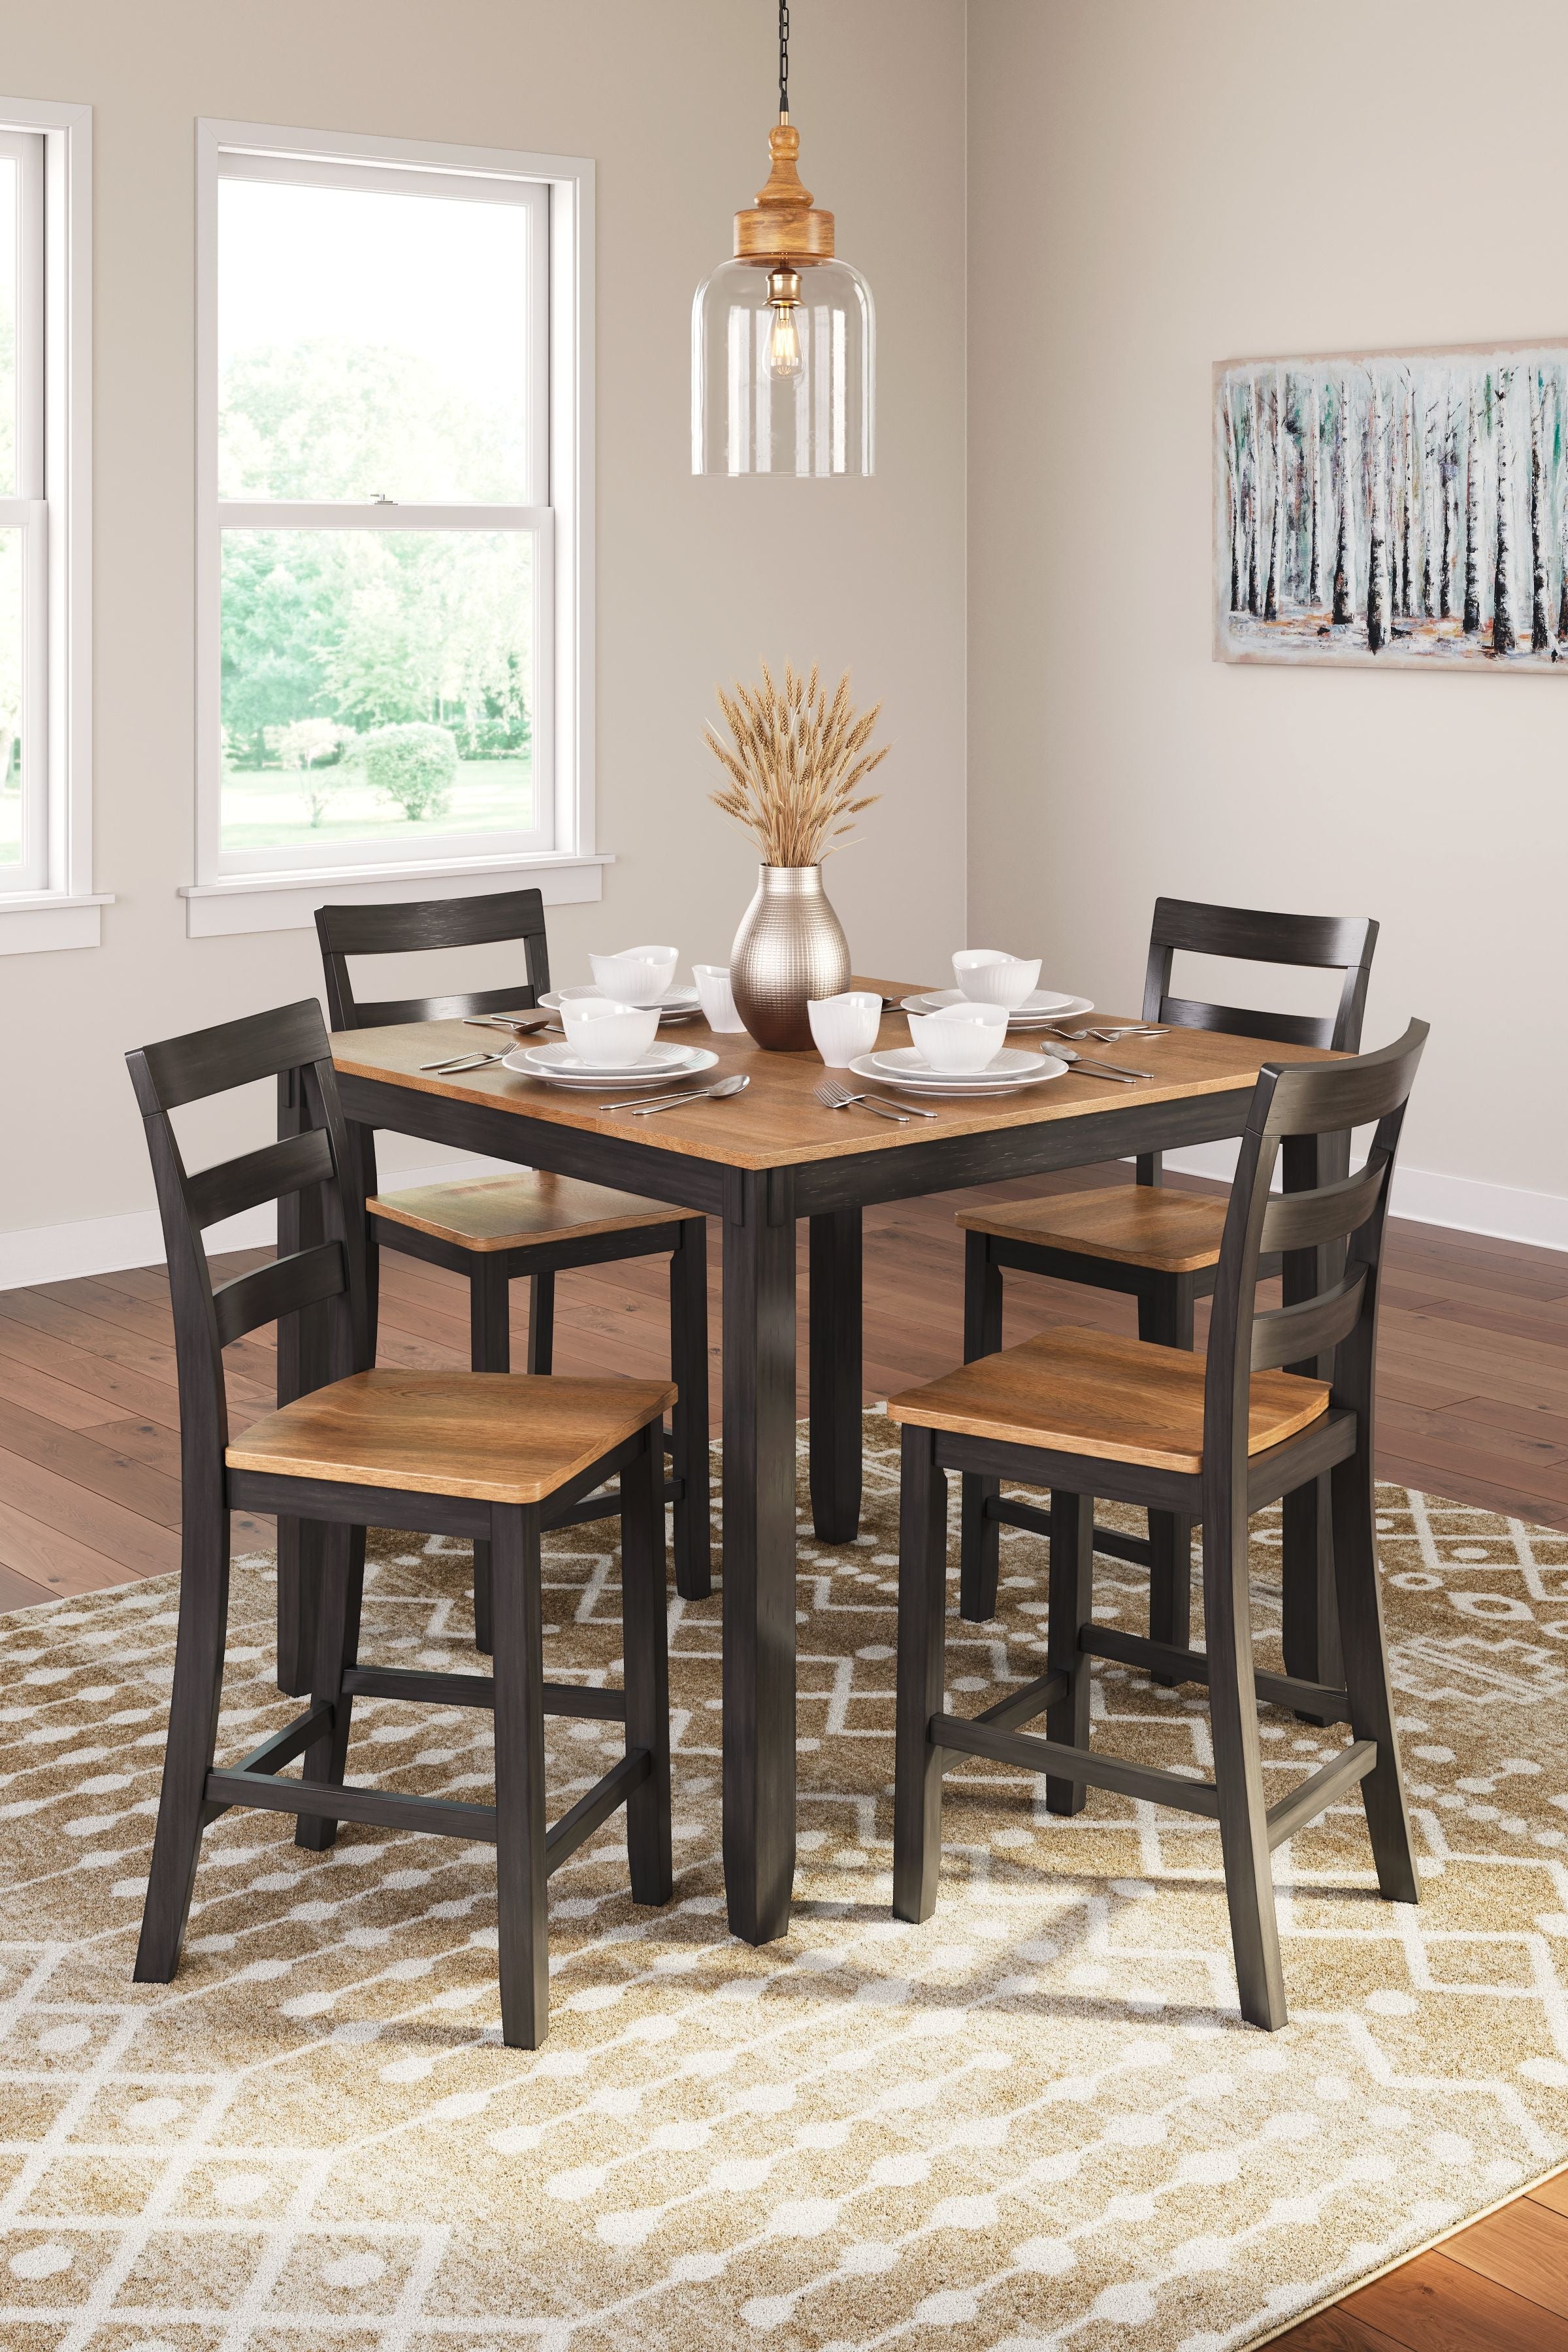 Signature Design by Ashley® - Gesthaven - Dining Room Counter Table Set - 5th Avenue Furniture